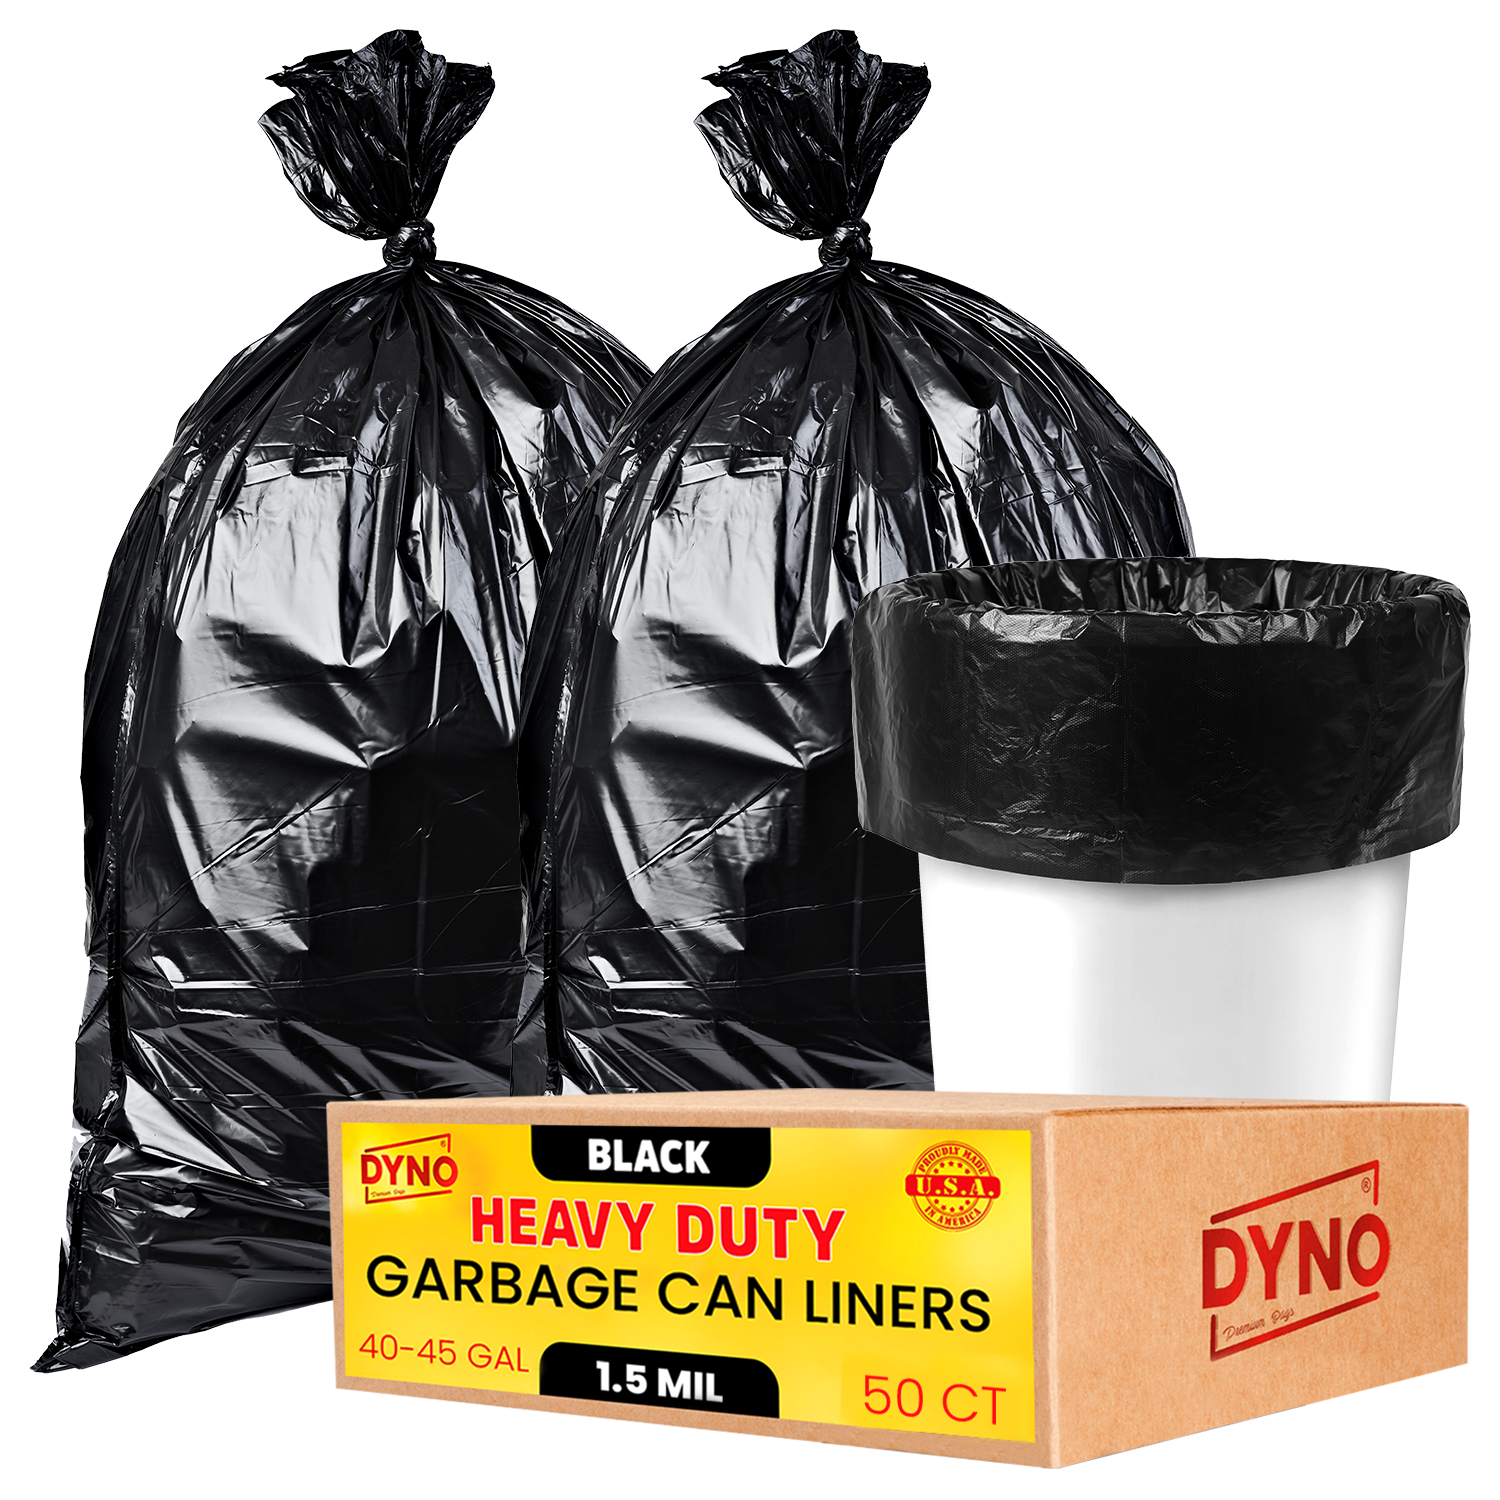 Dyno Products Online 64 Gallon Trash Bags Heavy Duty 1.5 Mil Black - 50 Count Large Trash Bags - Individually Folded - Industrial Trash Bags 64 Gallon